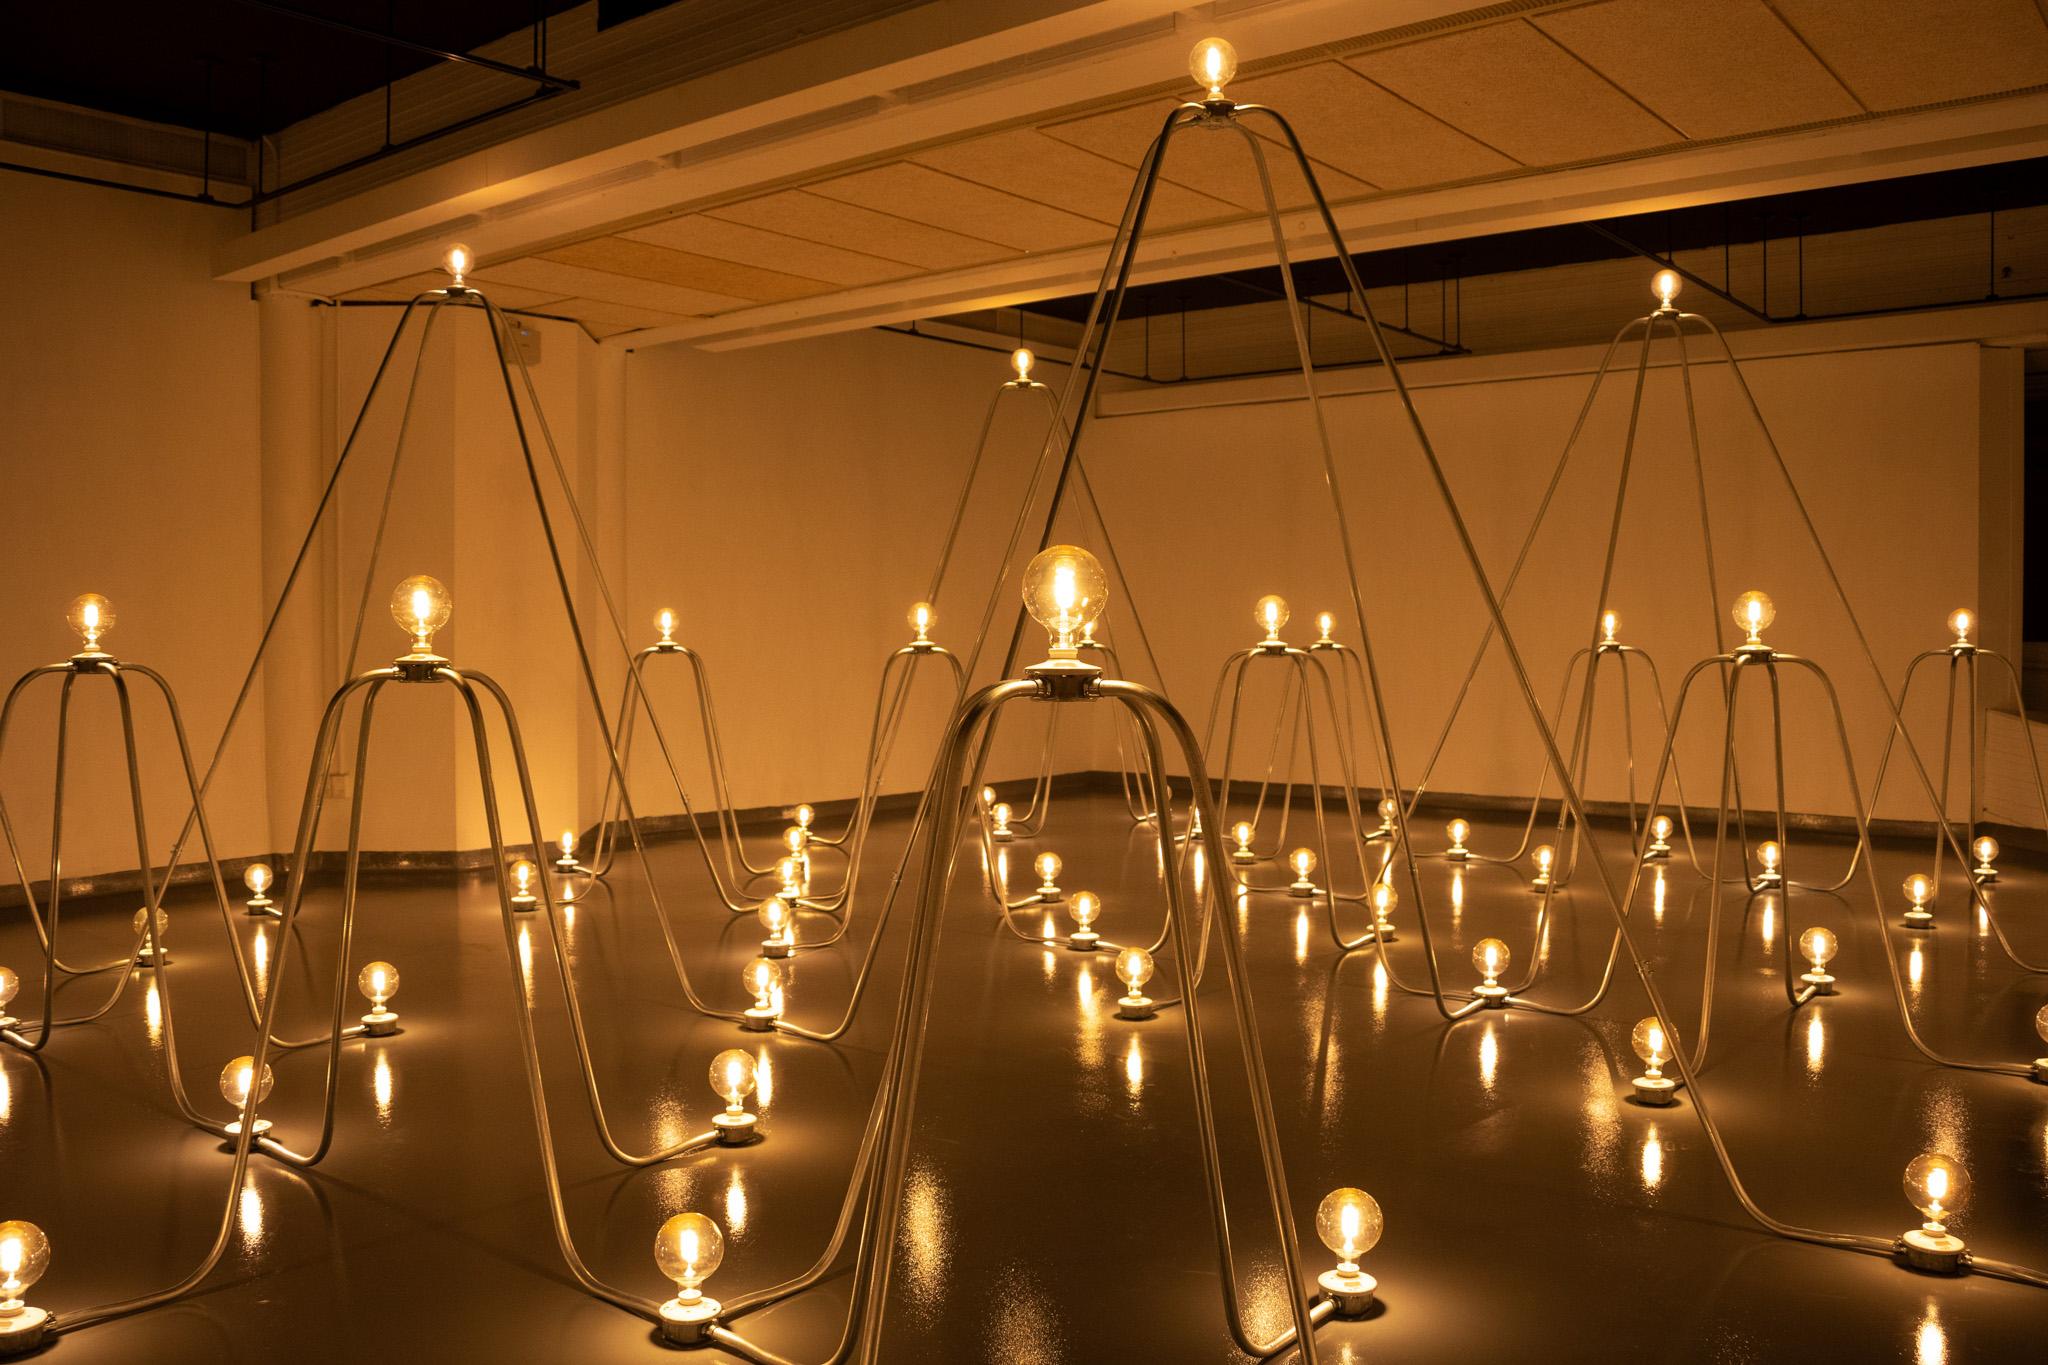 Nancy Holt's Electrical system is a network of arching conduit and lightbulbs